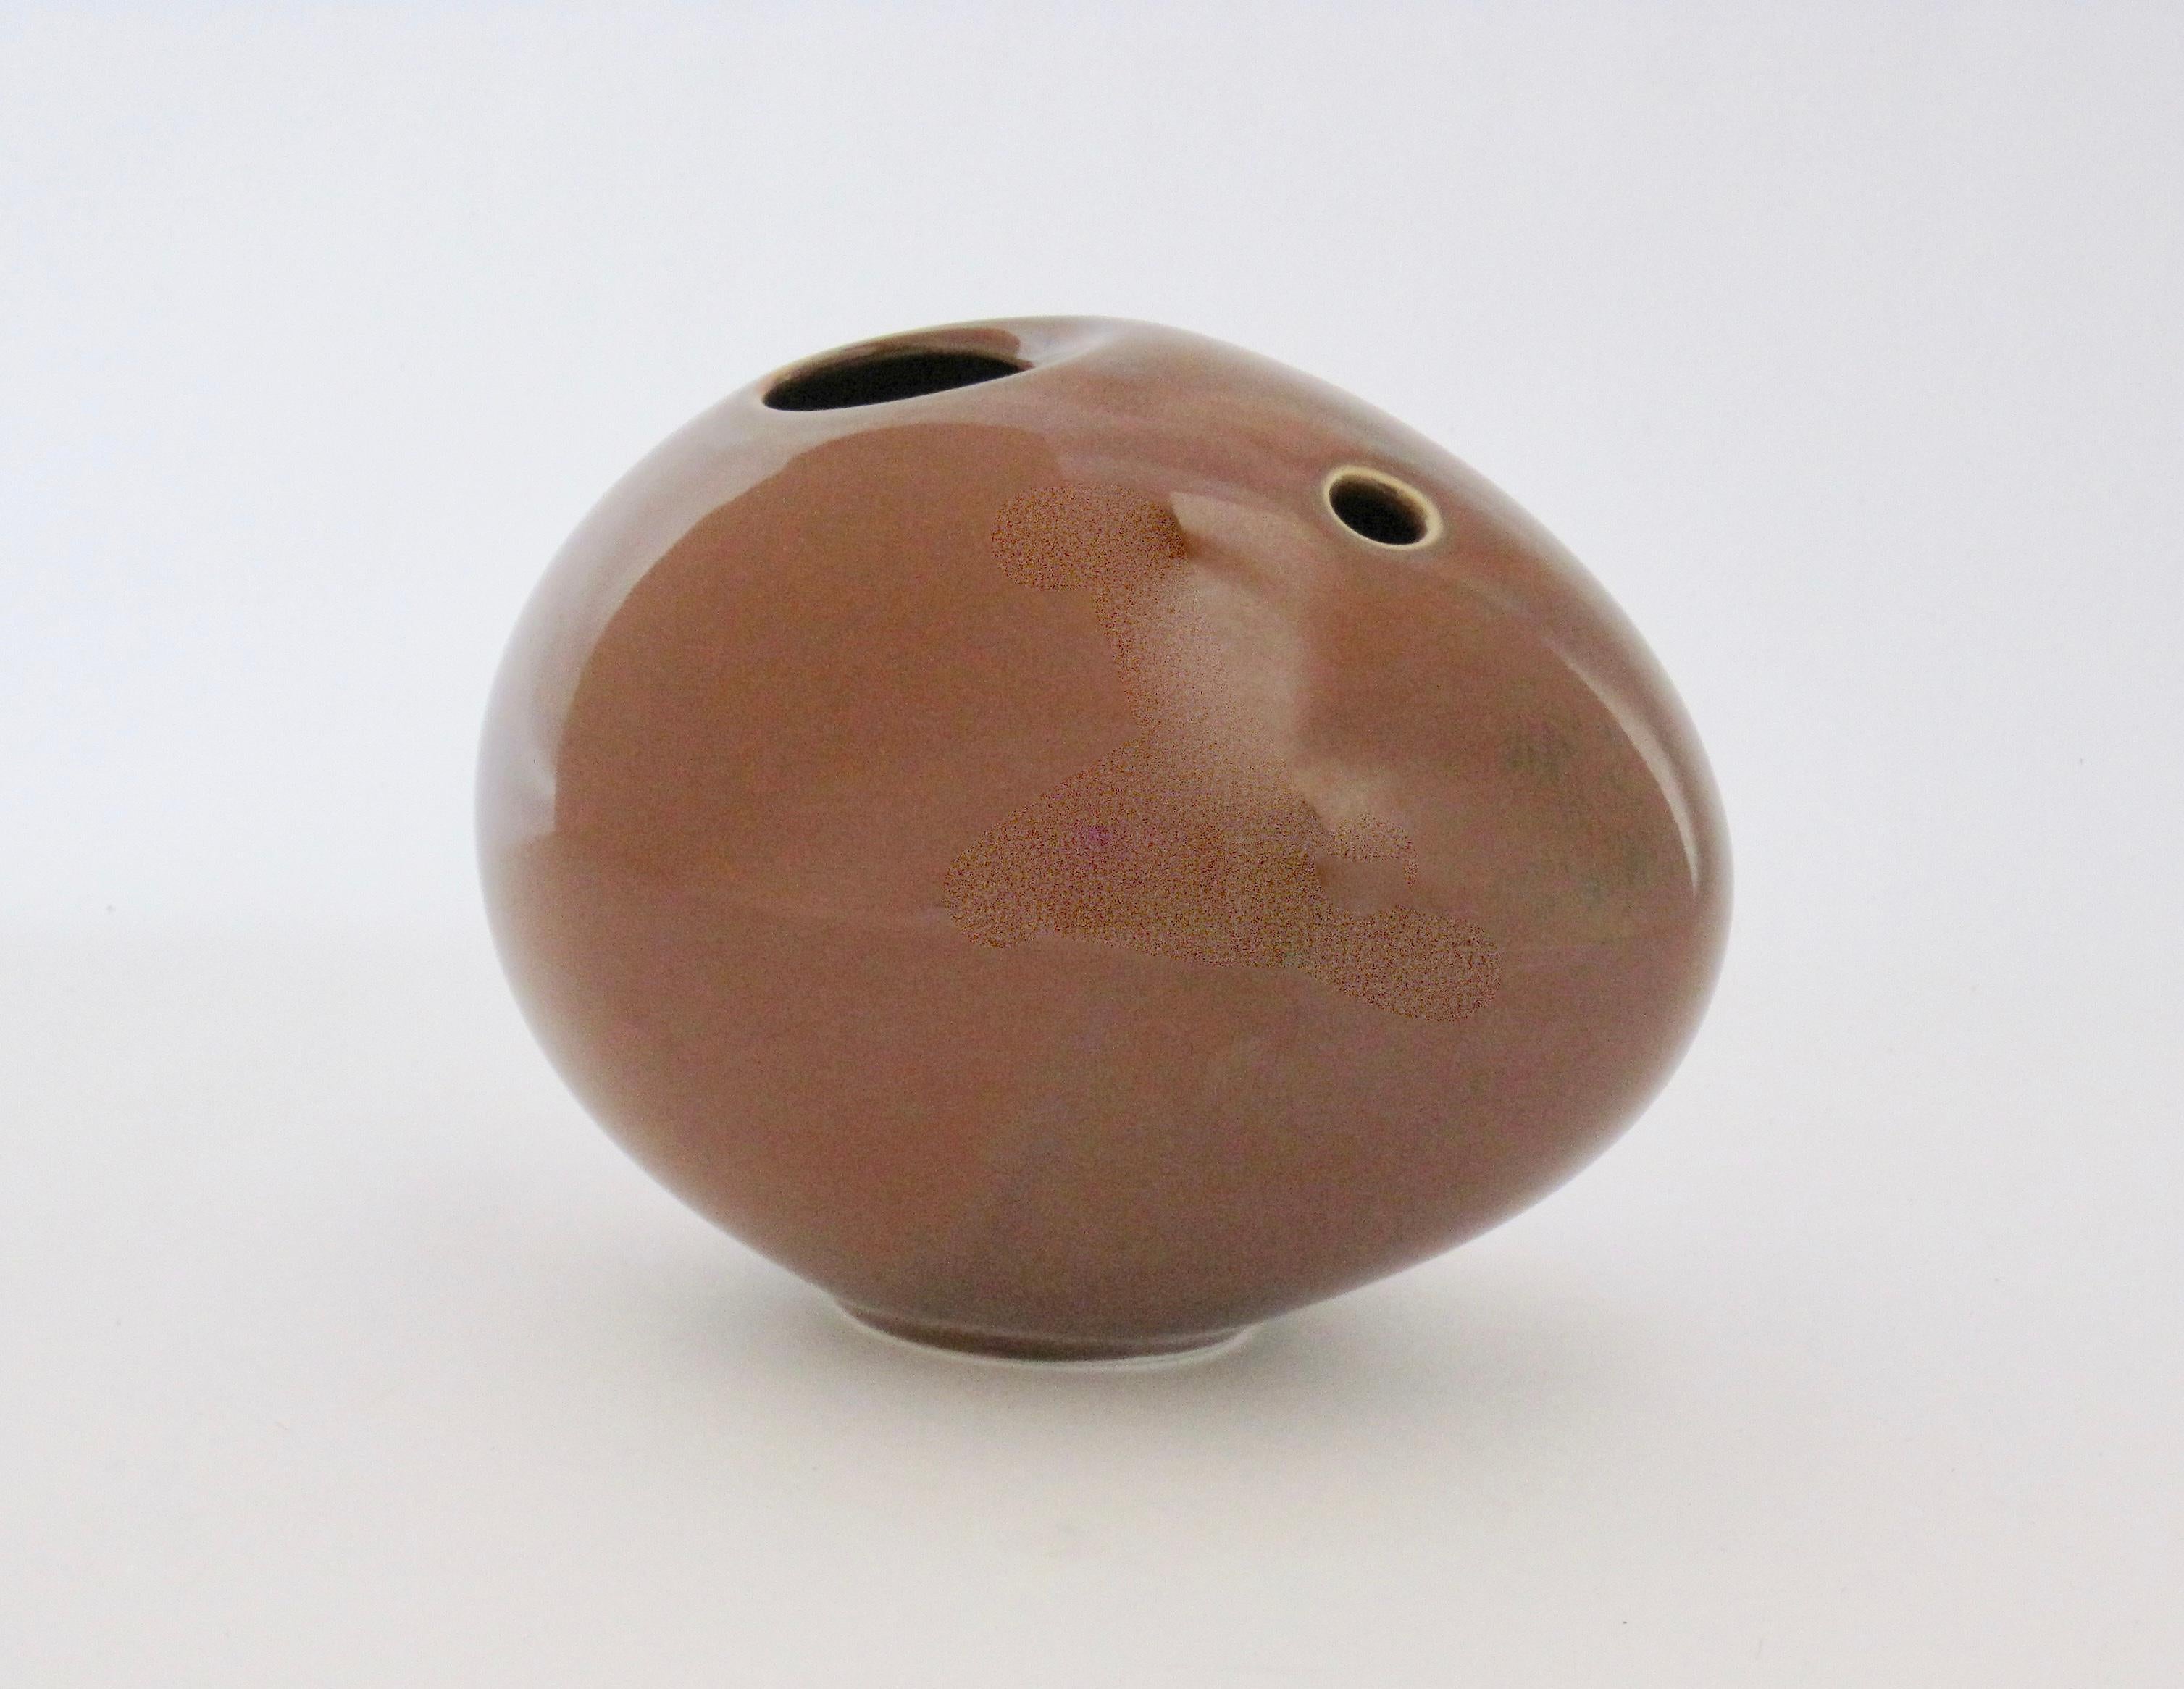 An obscure Rosenthal Studio-linie Germany umber brown egg-shaped bud vase. There are swirls of a deep brown/black and green/gray within the glaze. Interesting piece, I see it with cuttings of cherry blossoms.